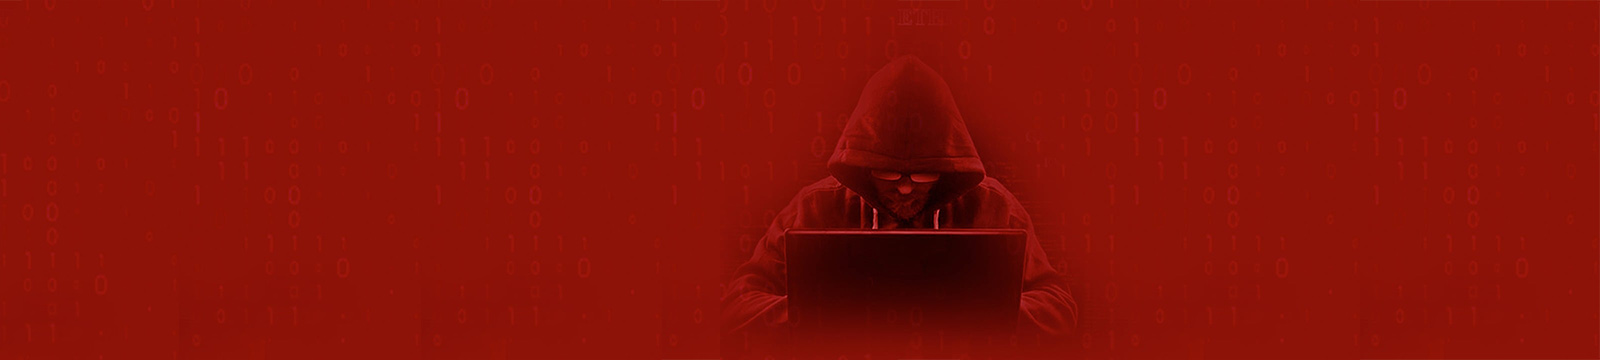 Image of a computer scammer in red.